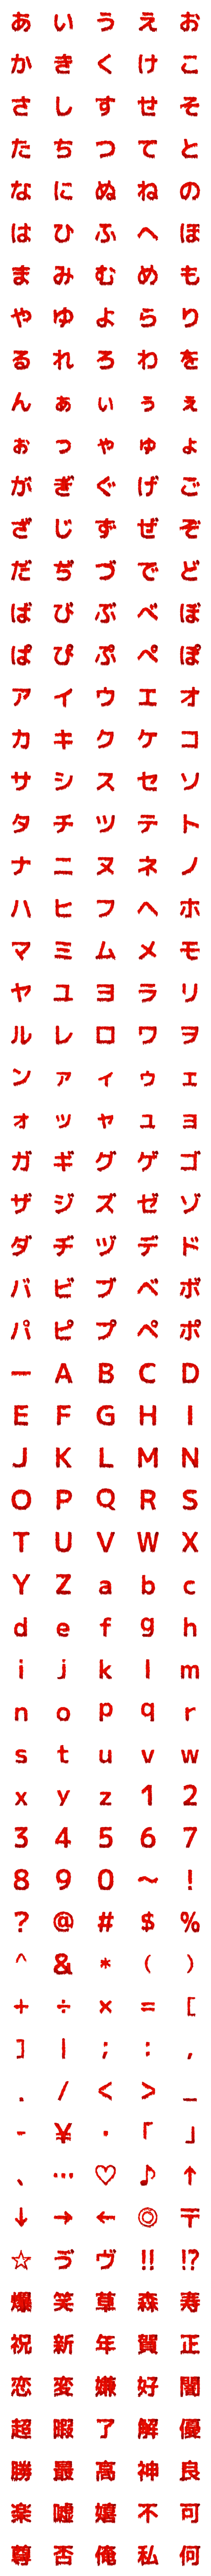 [LINE絵文字]血のダイイング文字 -ゴシック体-の画像一覧